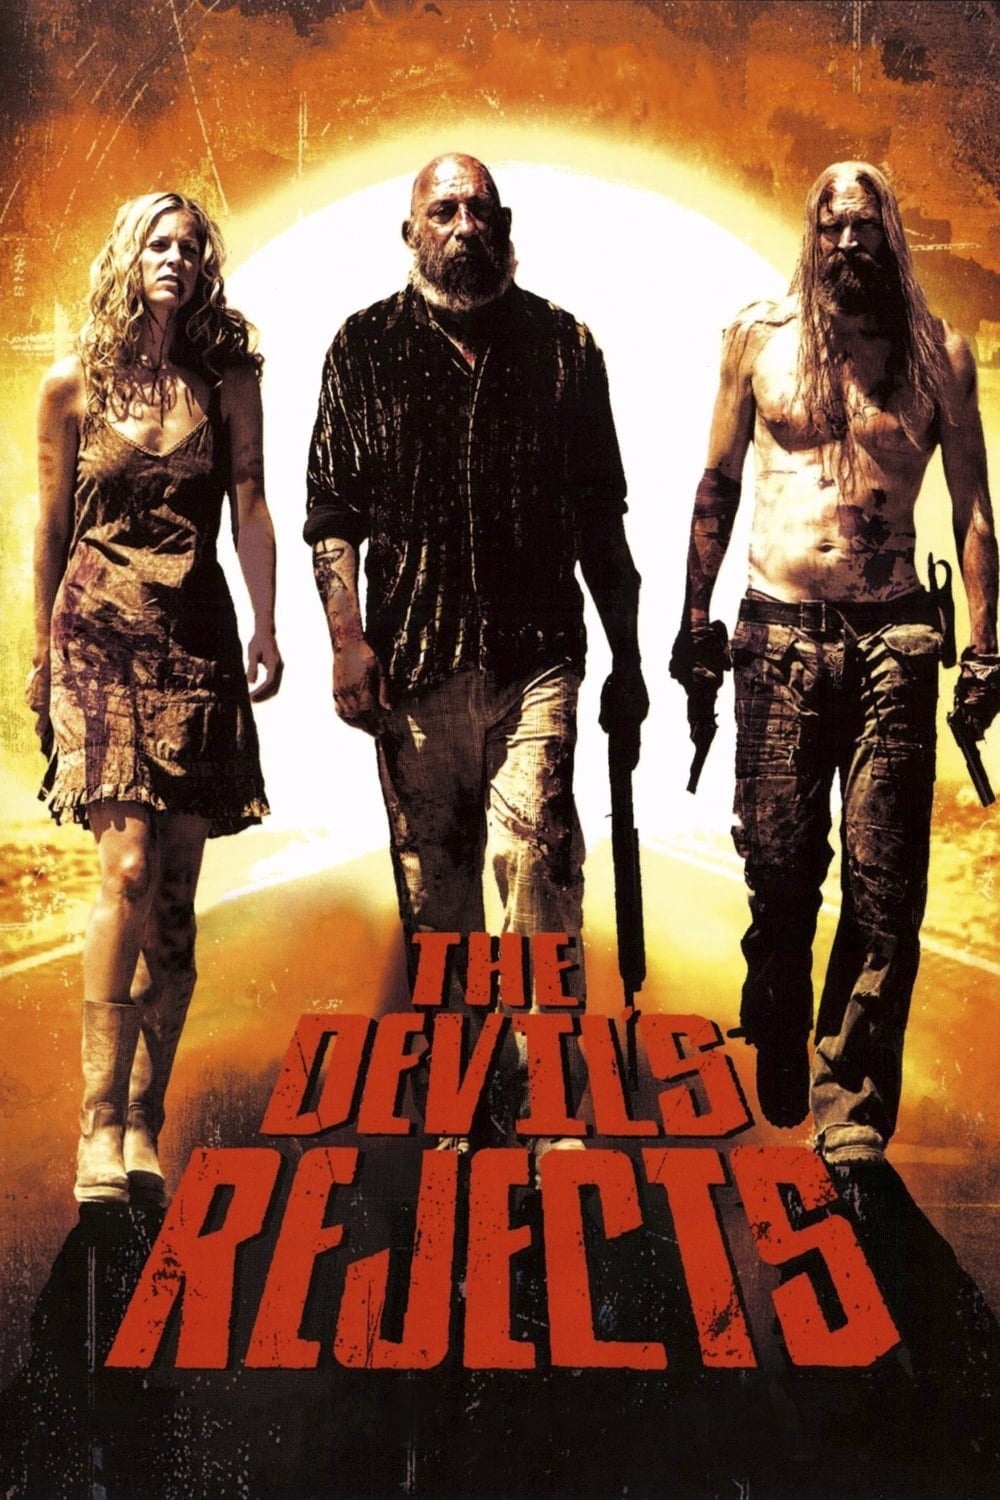 The Devils Rejects (2005) Dual Audio Hindi ORG 1080p 720p 480p BluRay Free Download